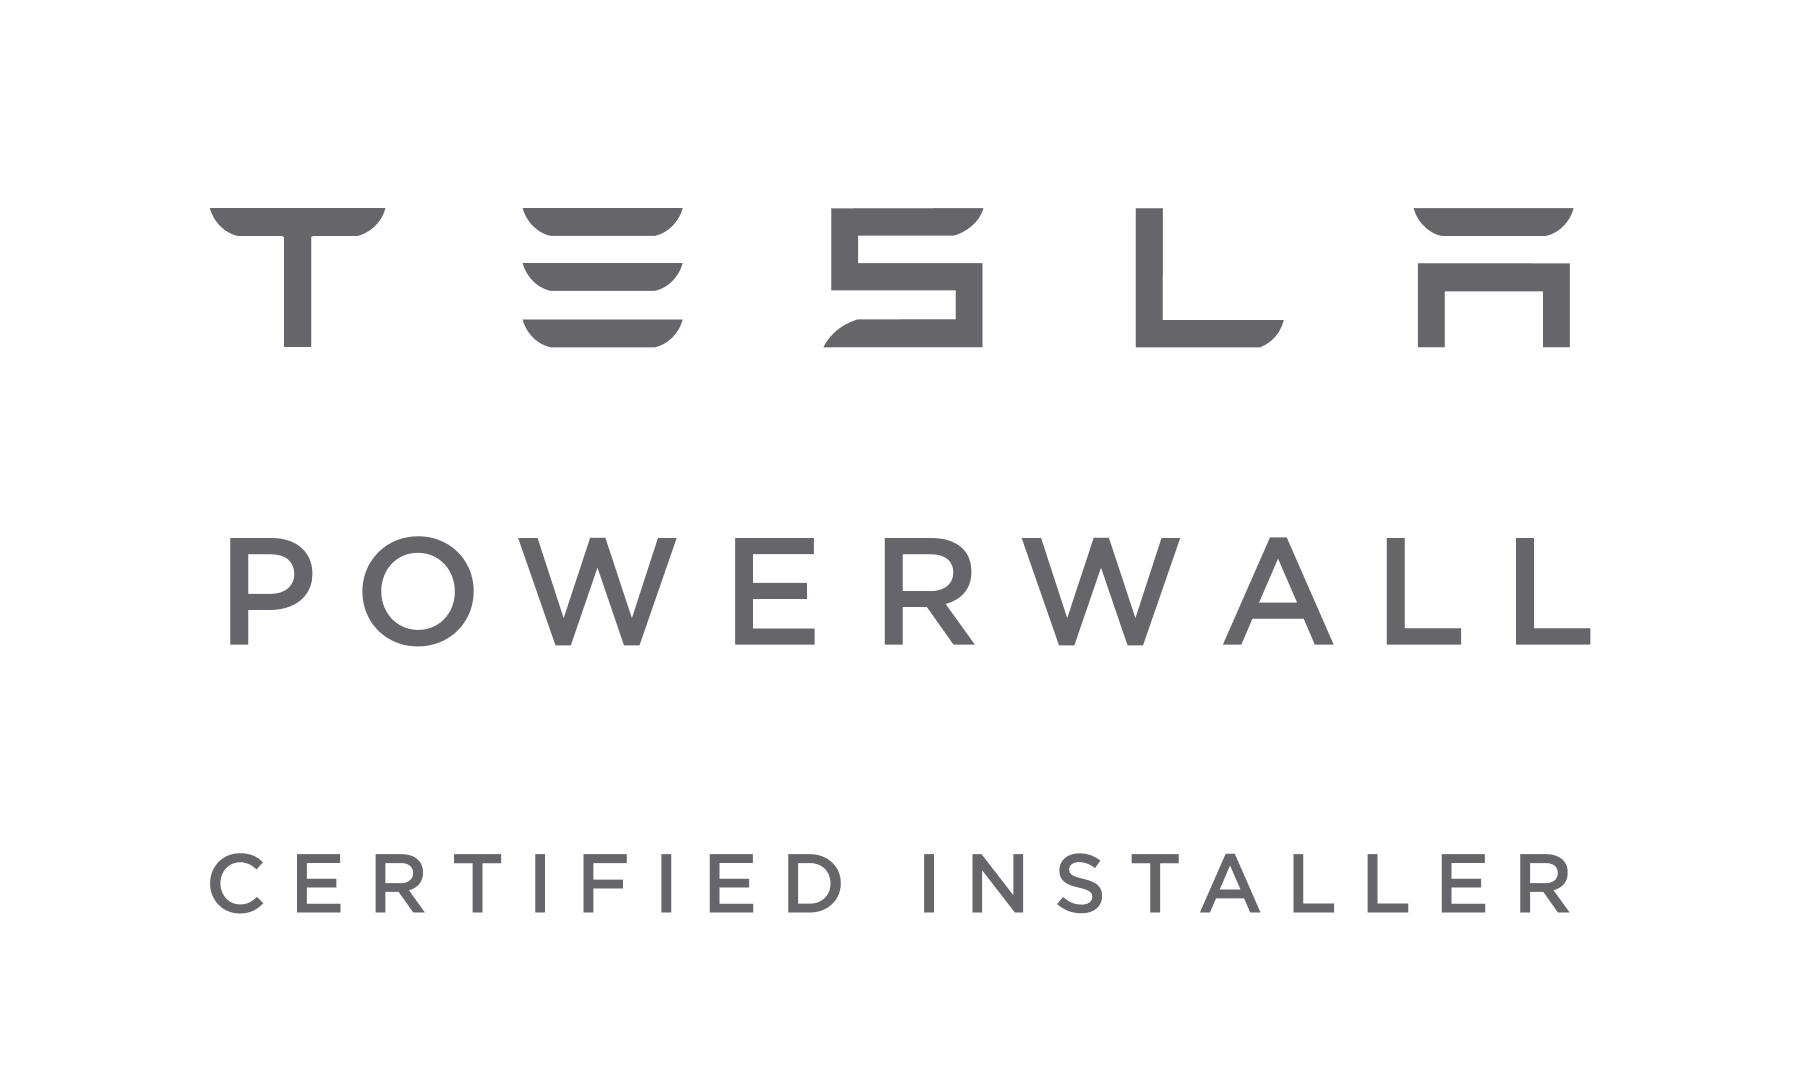 The battery storage for homes is a tesla powerwall and we are a certified installer.